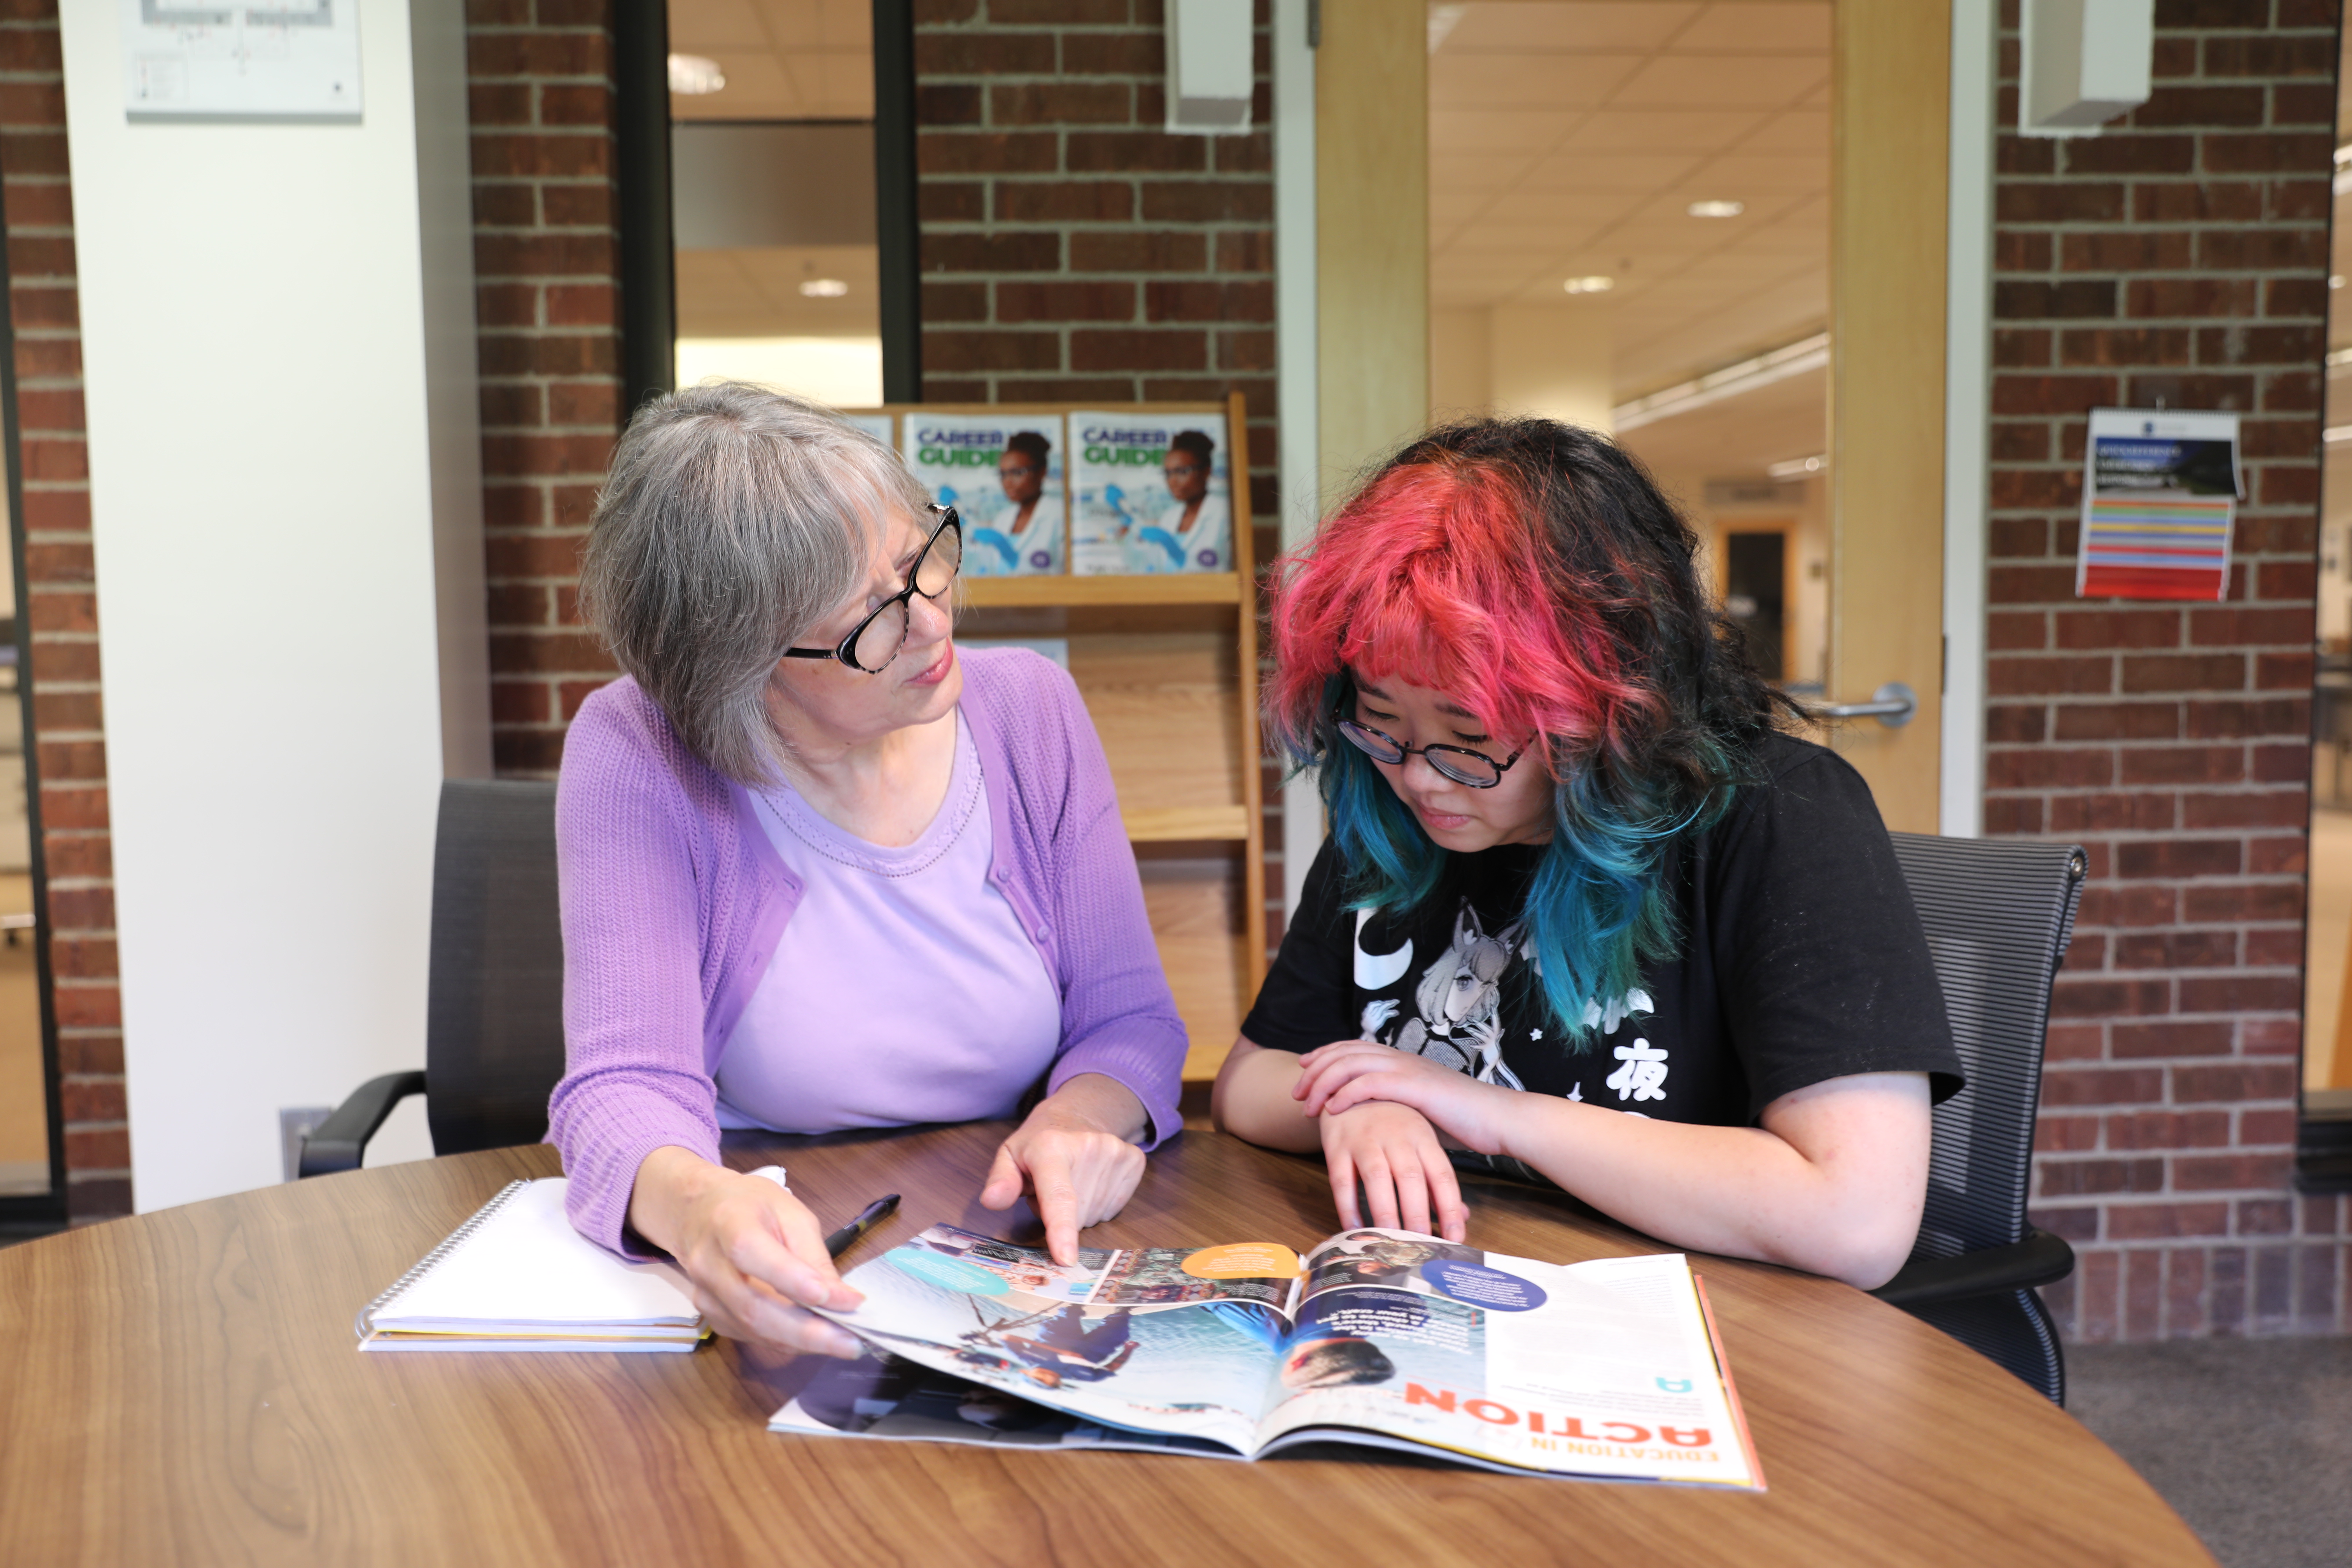 NHCC Workforce Innovation and Experiential Learning Center Director, Karen Philbin, sits with a female student at a table in the library looking at a career magazine together